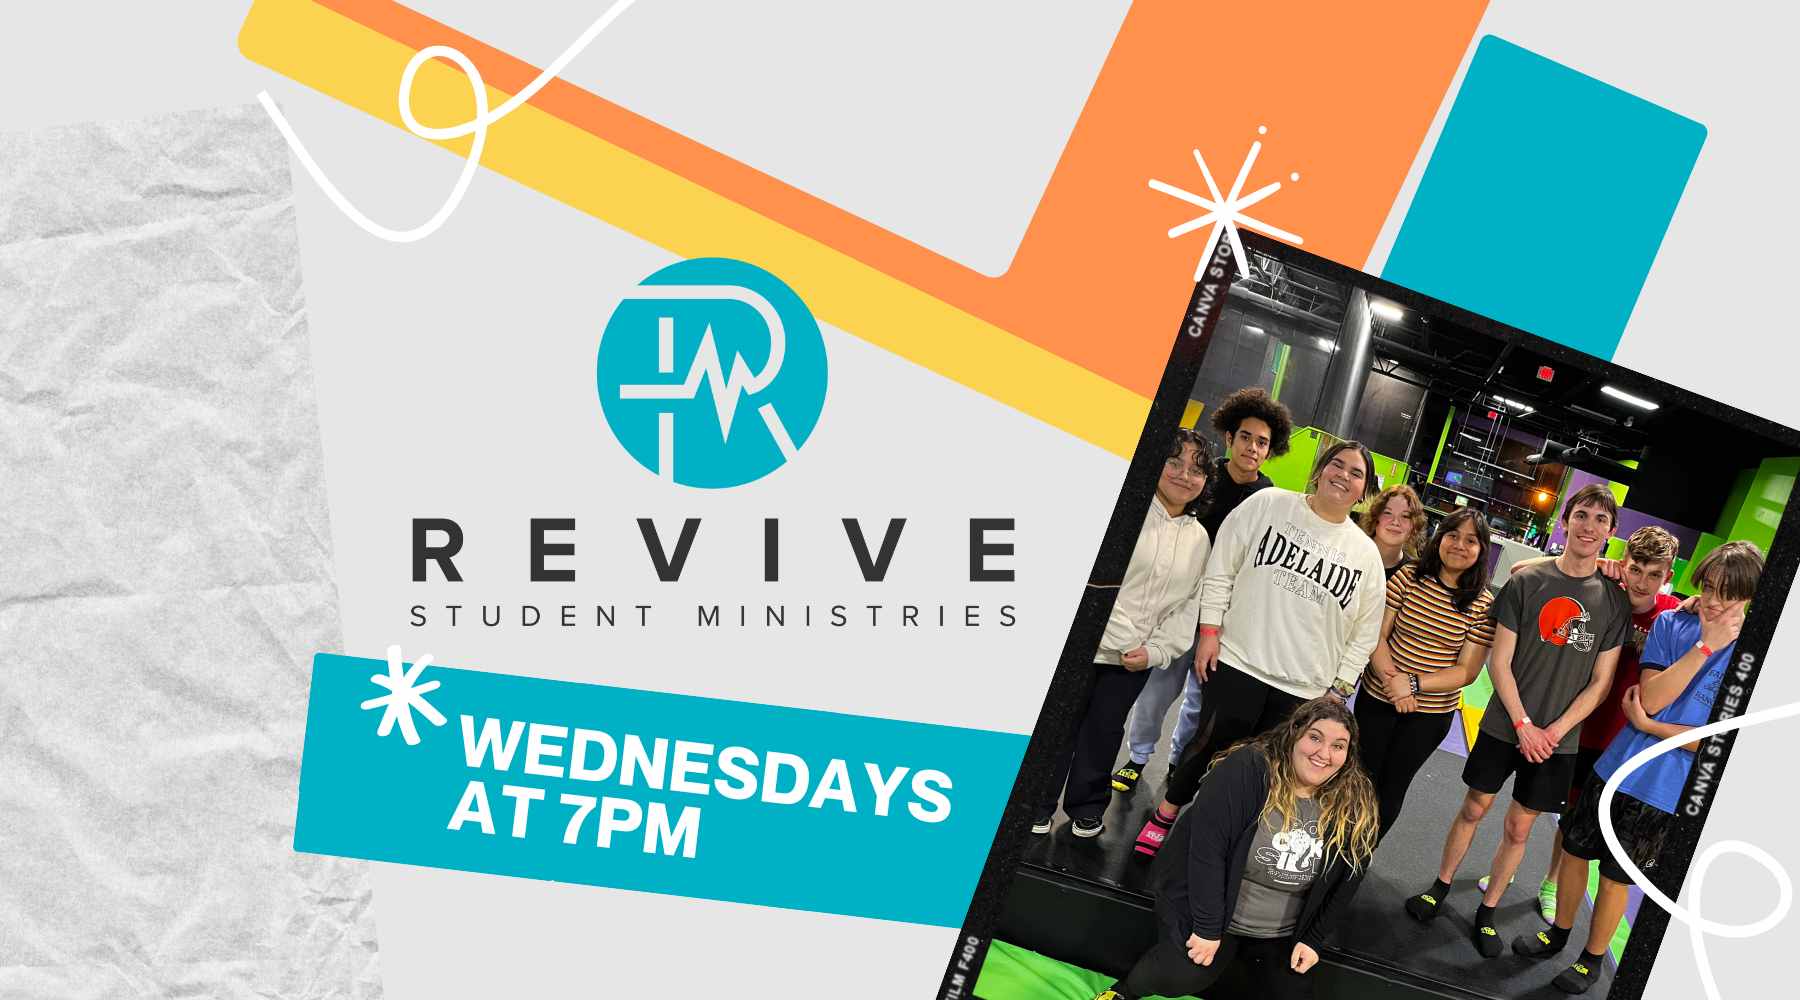 REVIVE STUDENT MINISTRIES